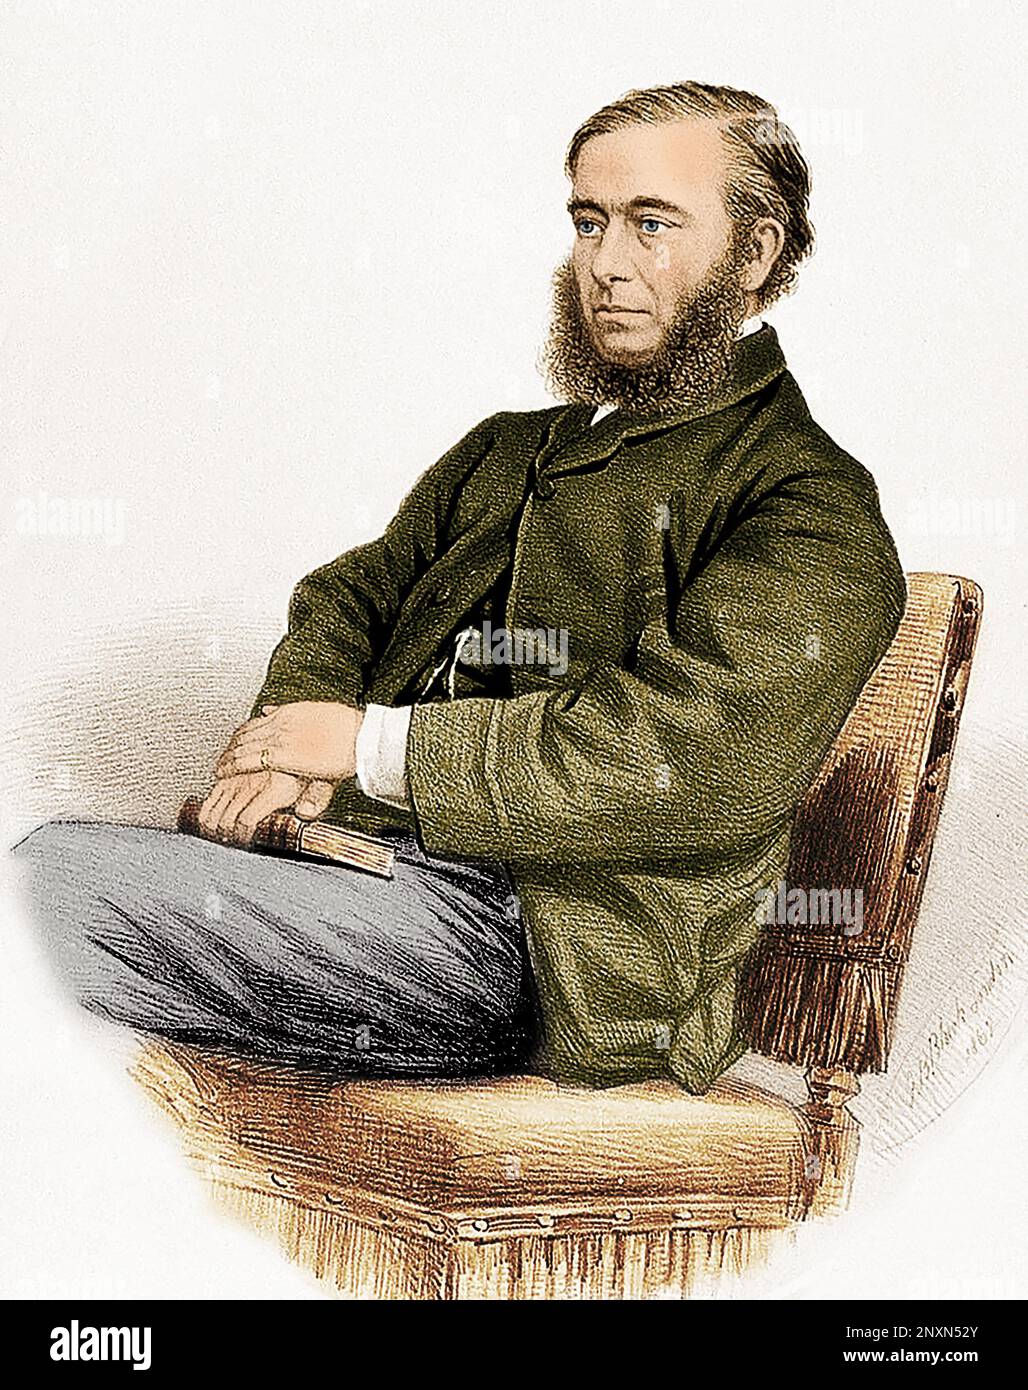 William Budd (1811-1880), English physician and epidemiologist who particularly understood the transmission of cholera and typhoid fever. Colorized. Stock Photo